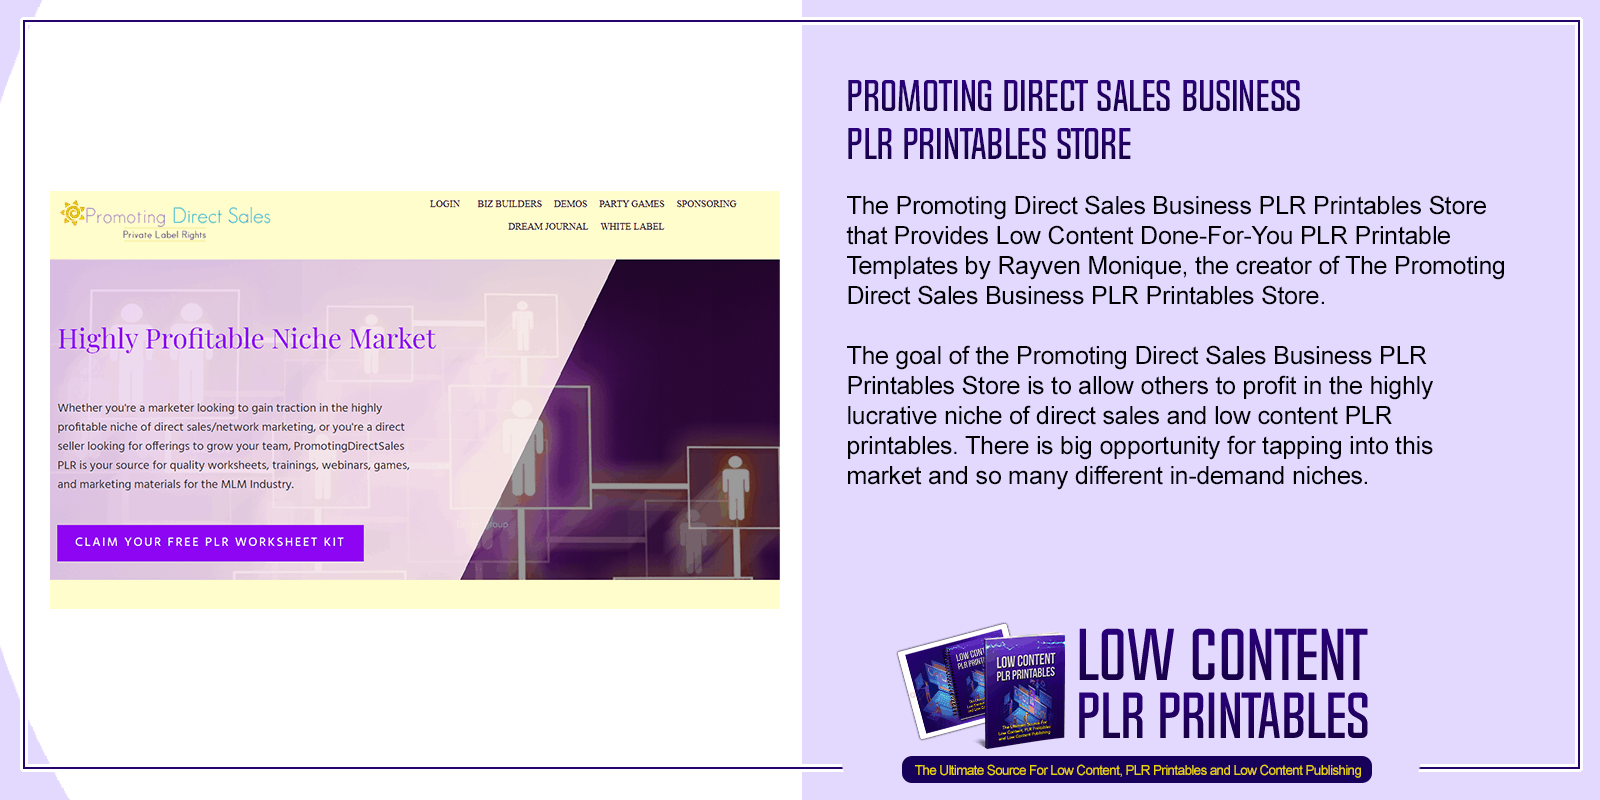 Promoting Direct Sales Business PLR Printables Store